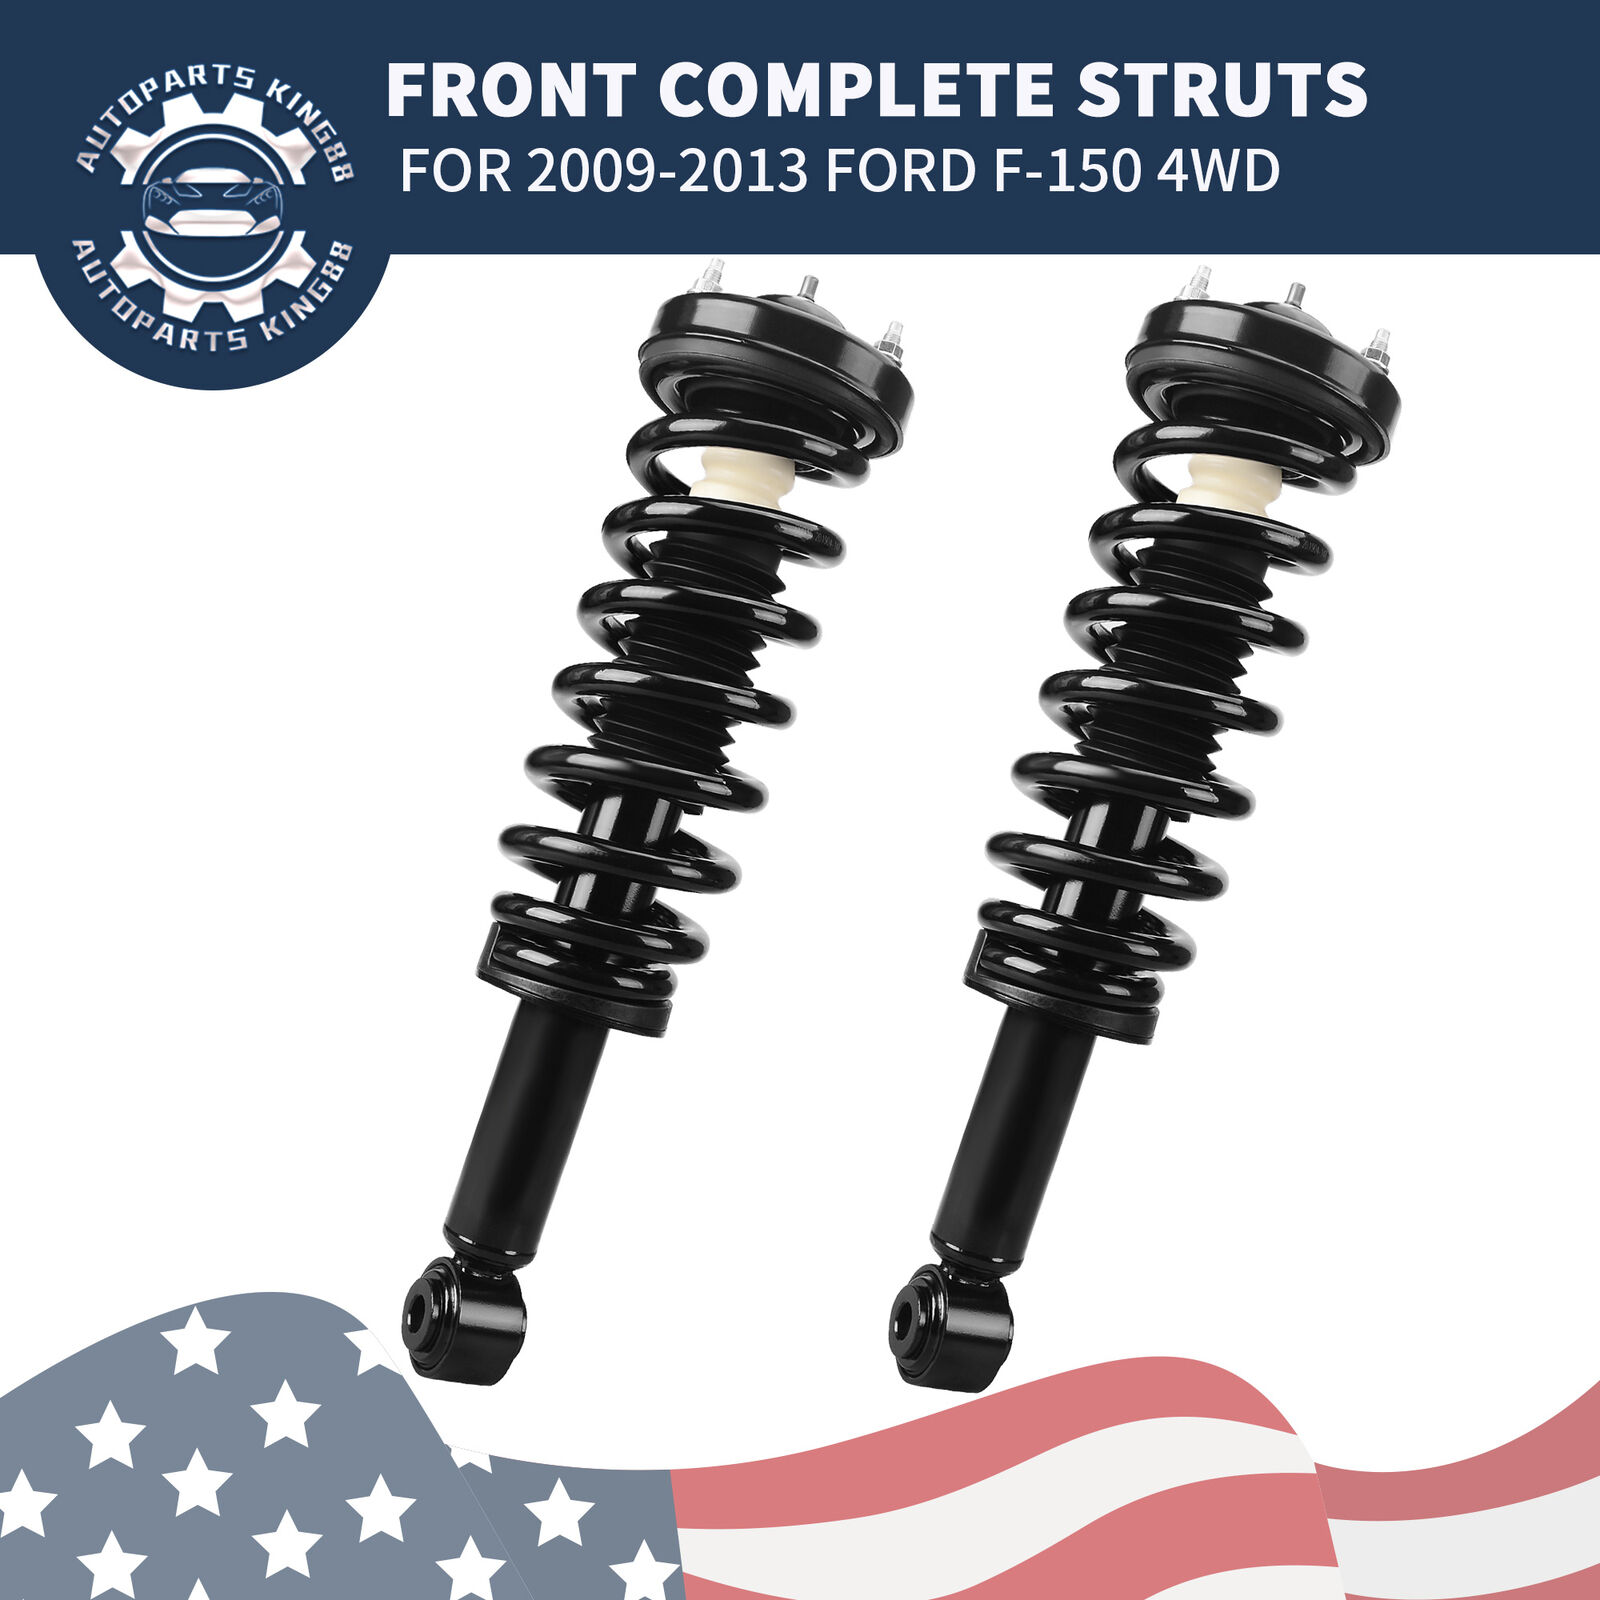 2PCS Front Struts Shock & Coil Springs Assembly Kit for 2009-2013 Ford F-150 4WD